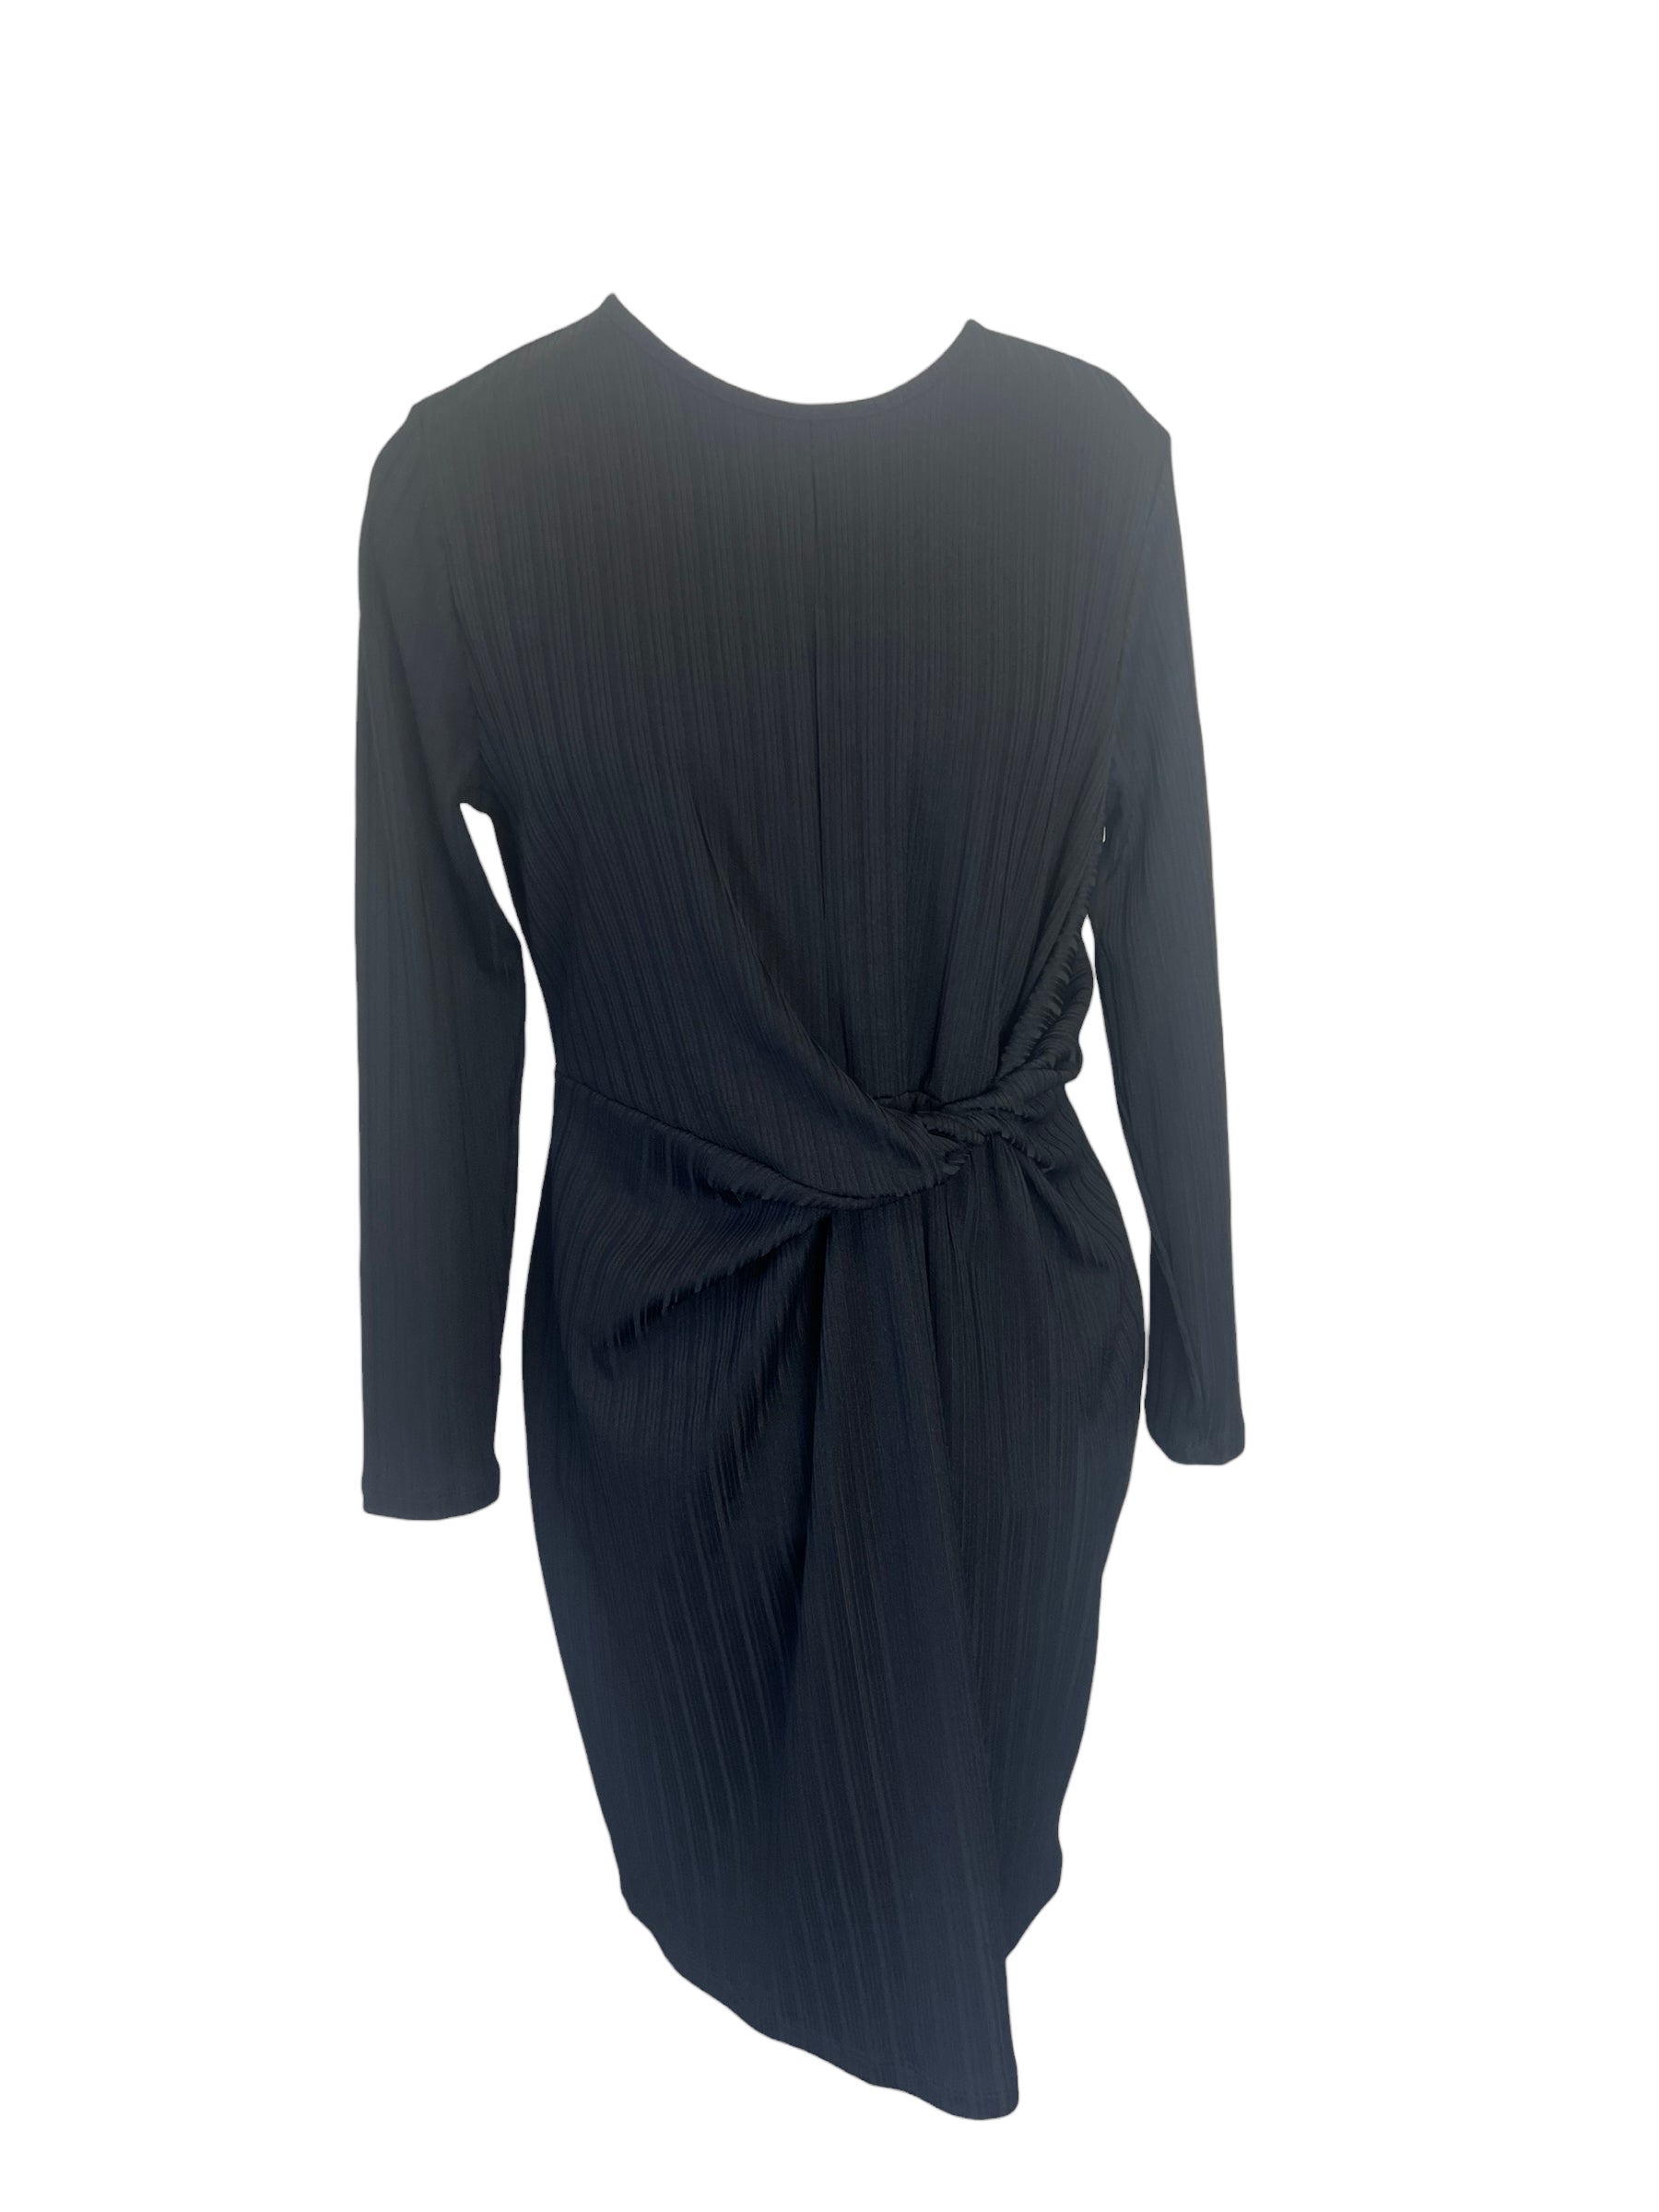 M&S Ribbed Collection Dress